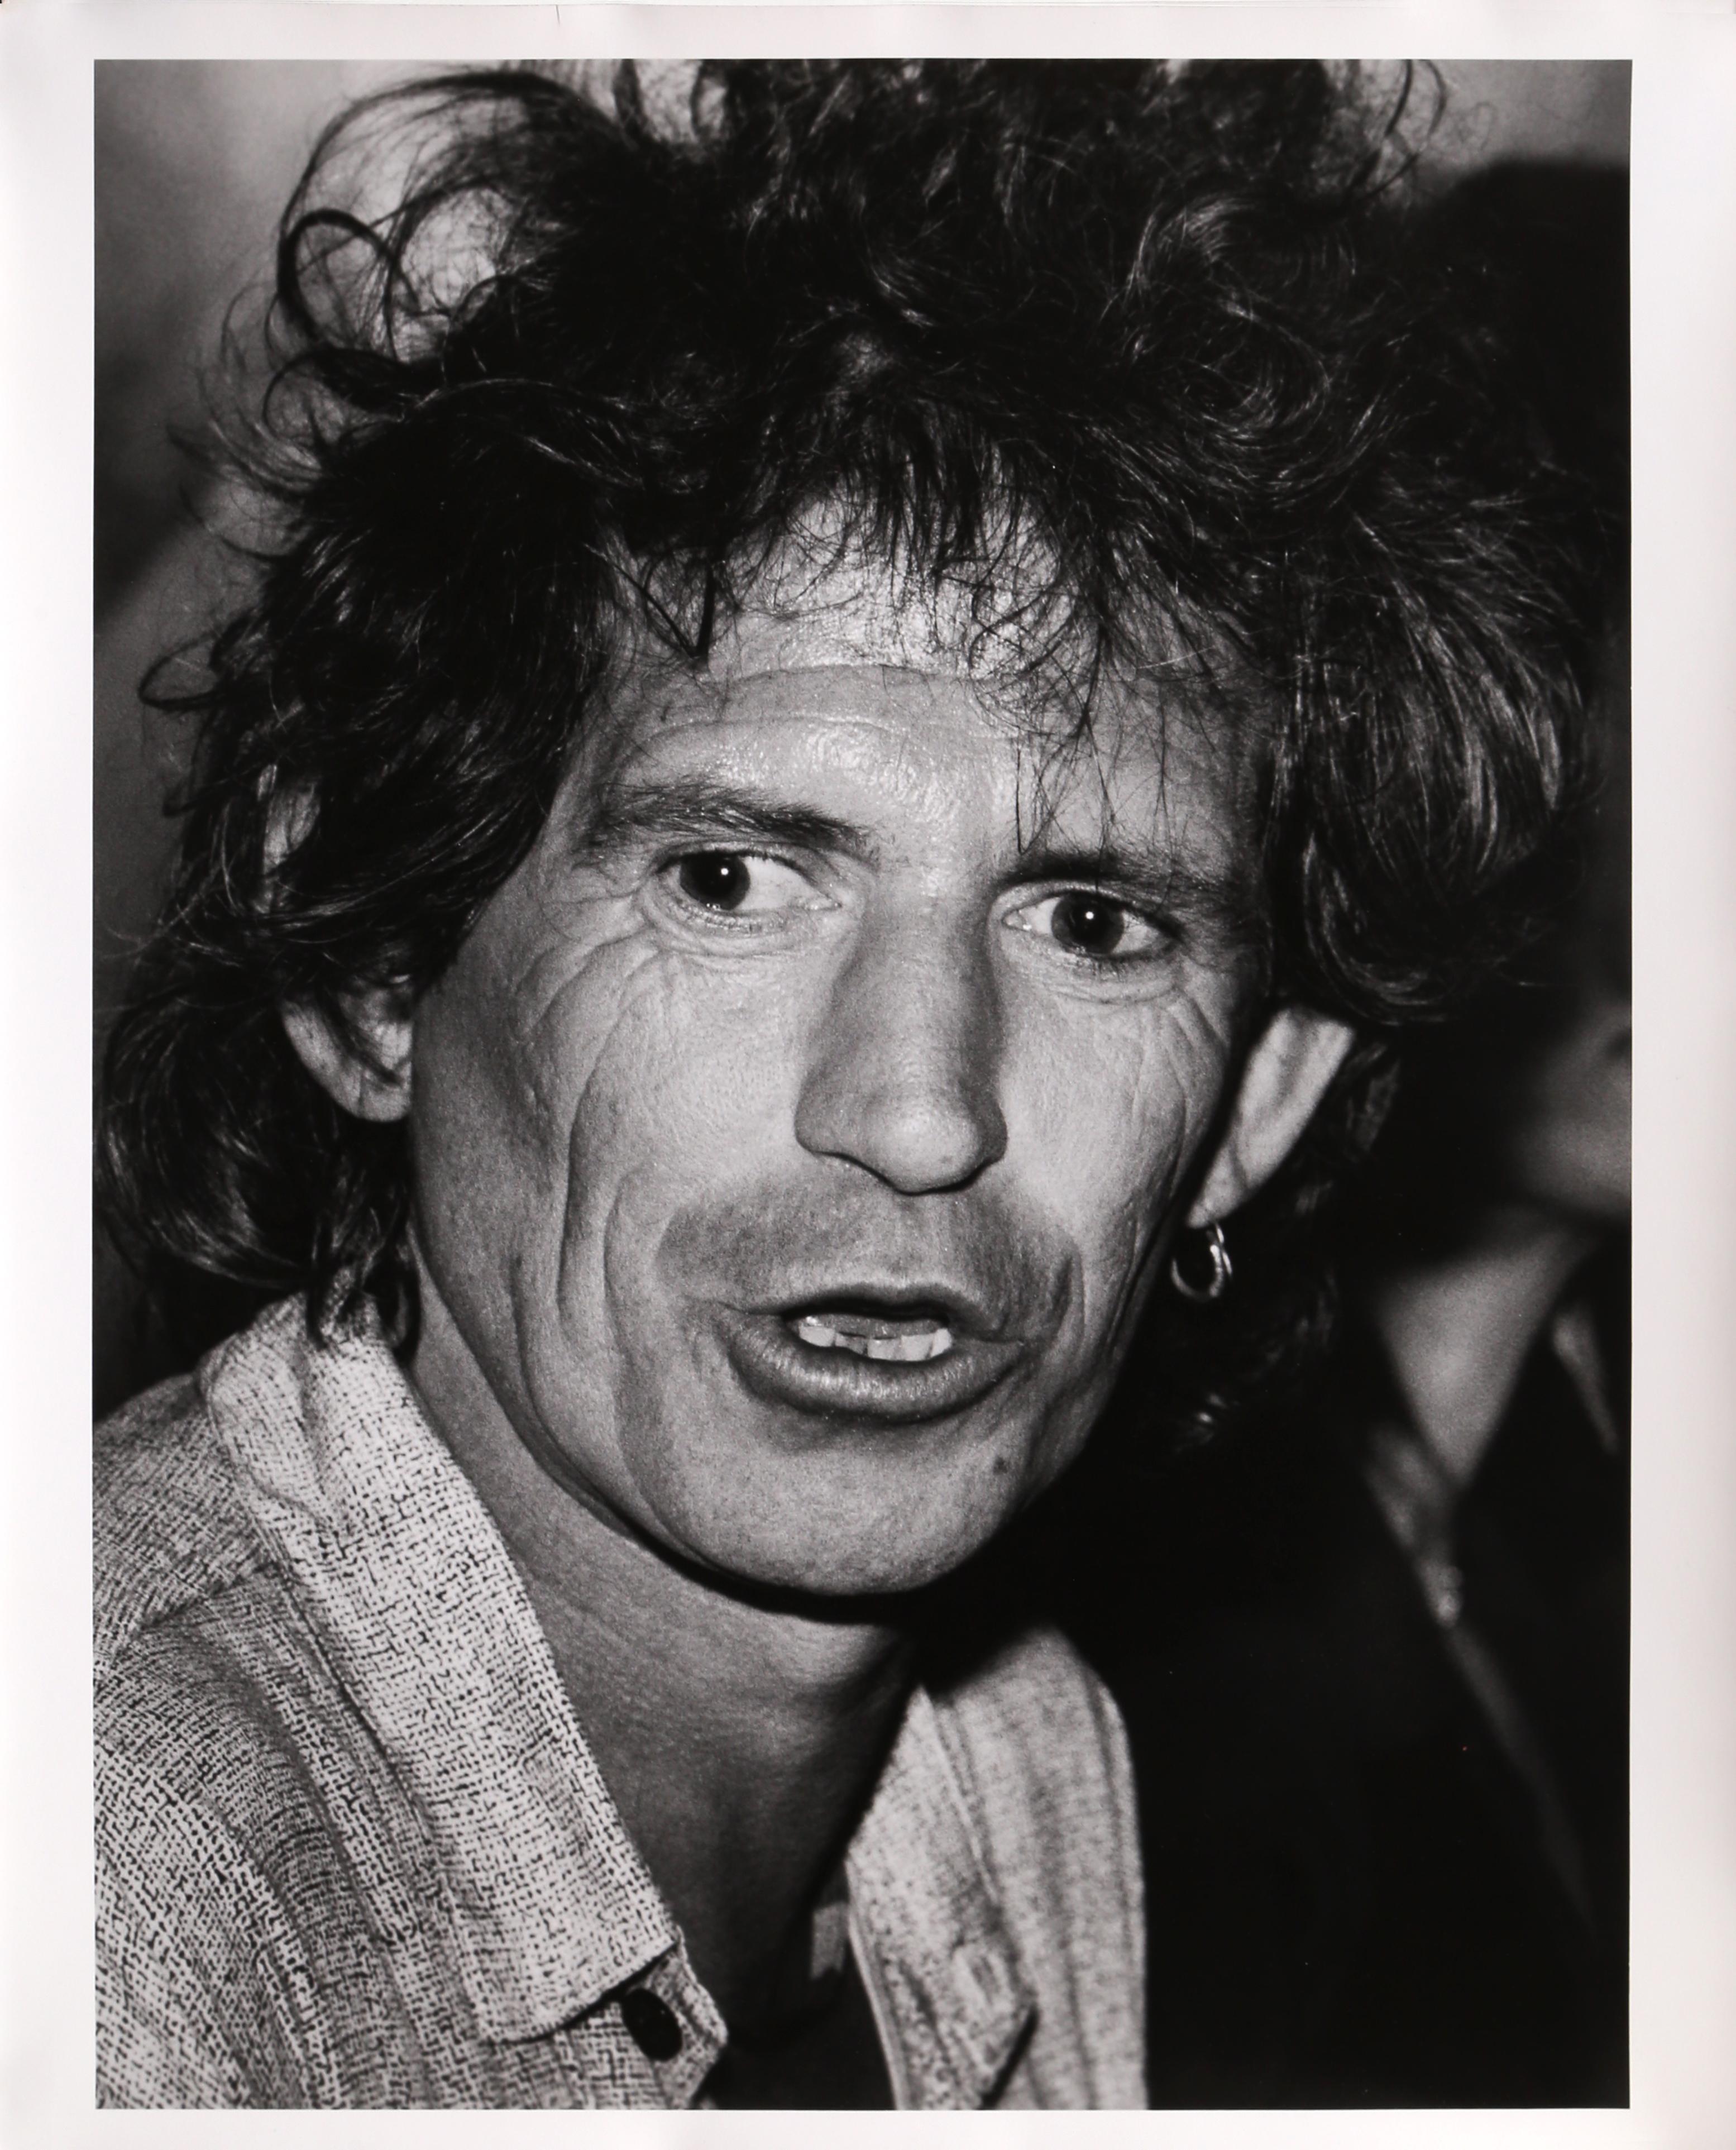 Keith Richards Rolling Stones at the Chelsea Hotel, Photograph by Rita Barros